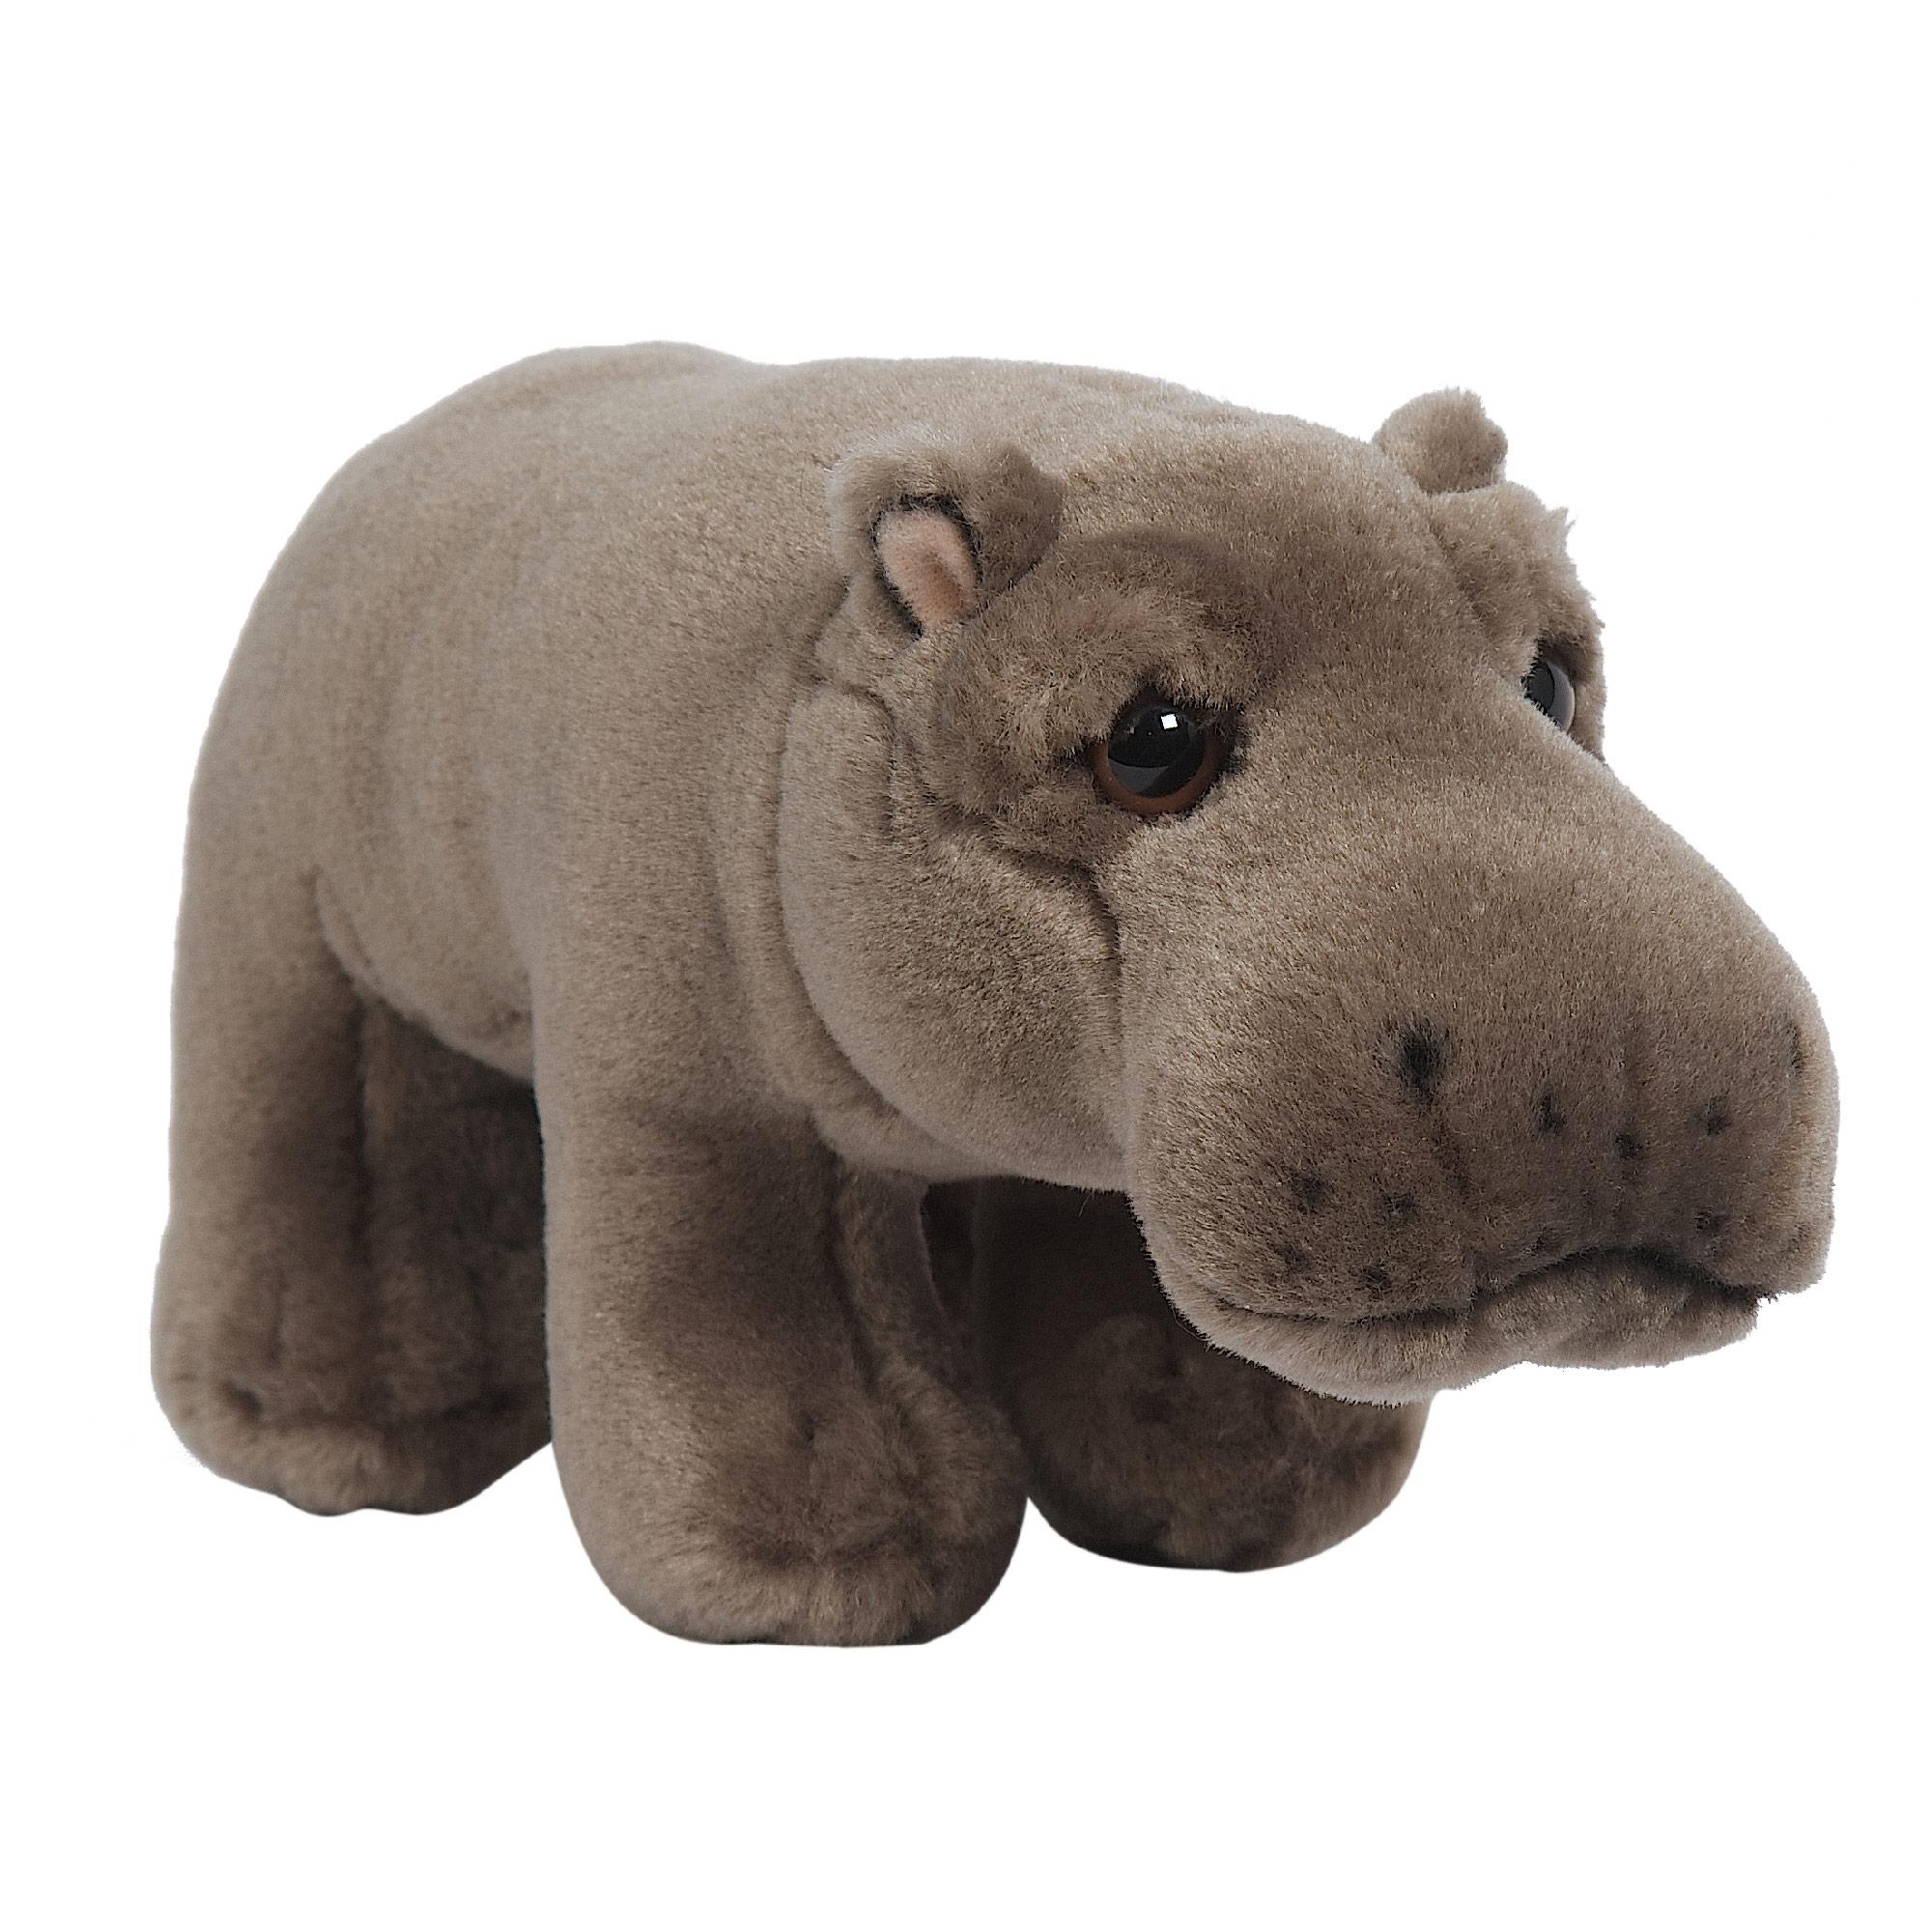 Hamleys Baby Haris Hippo Soft Toy - £18.00 - Hamleys for Toys and Games